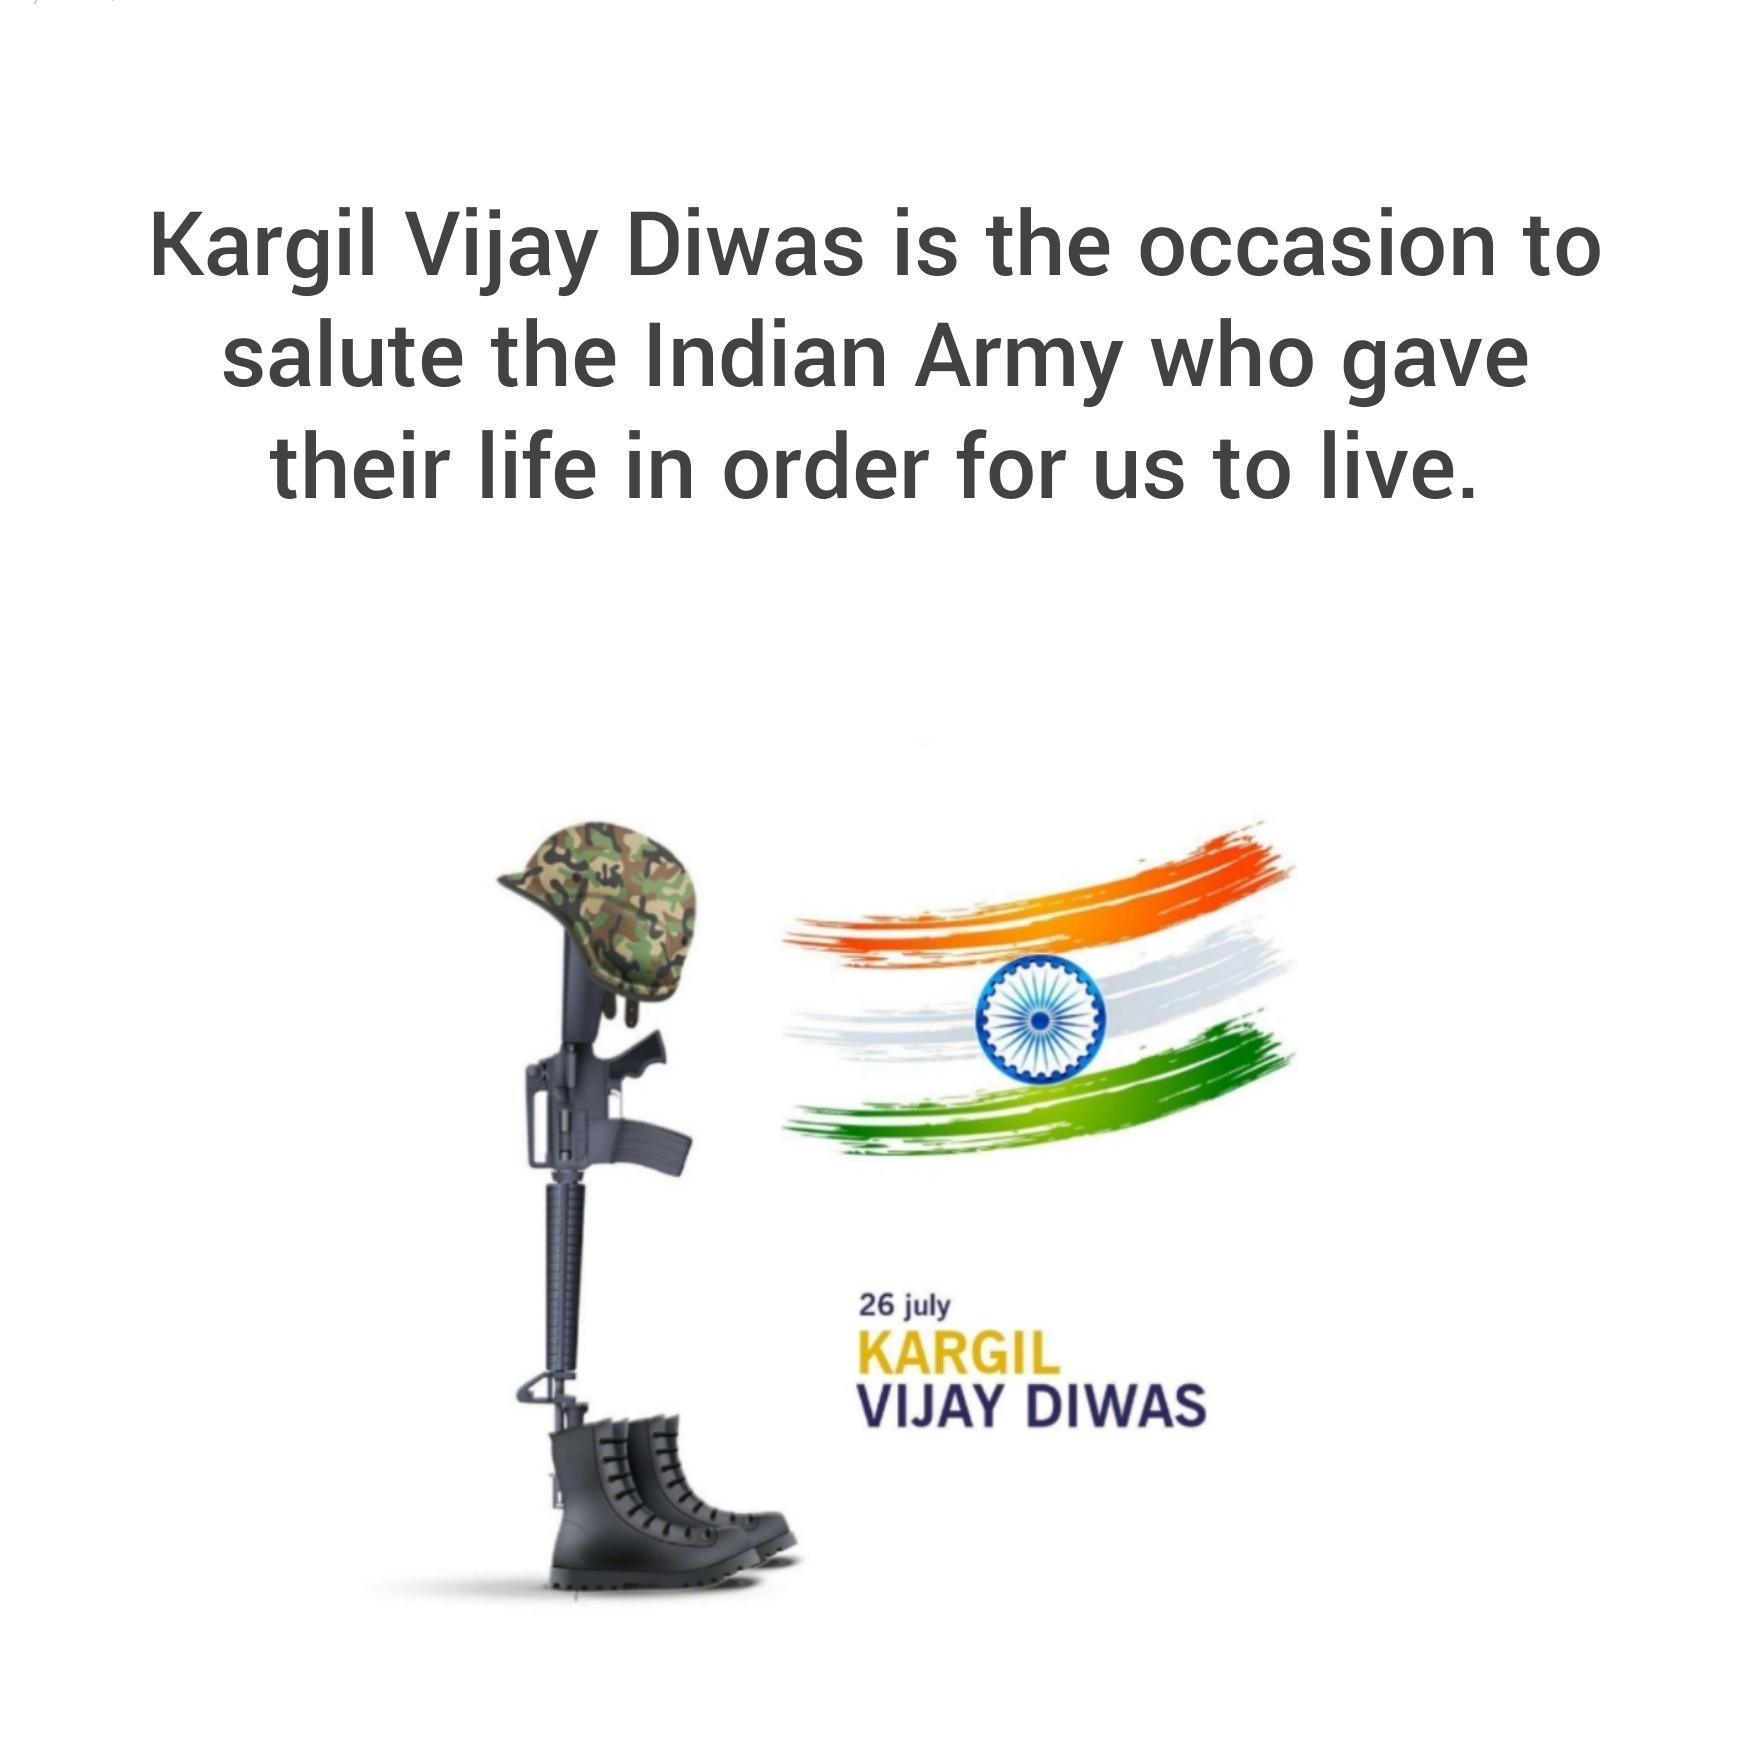 Kargil Vijay Diwas is the occasion to salute the Indian Army